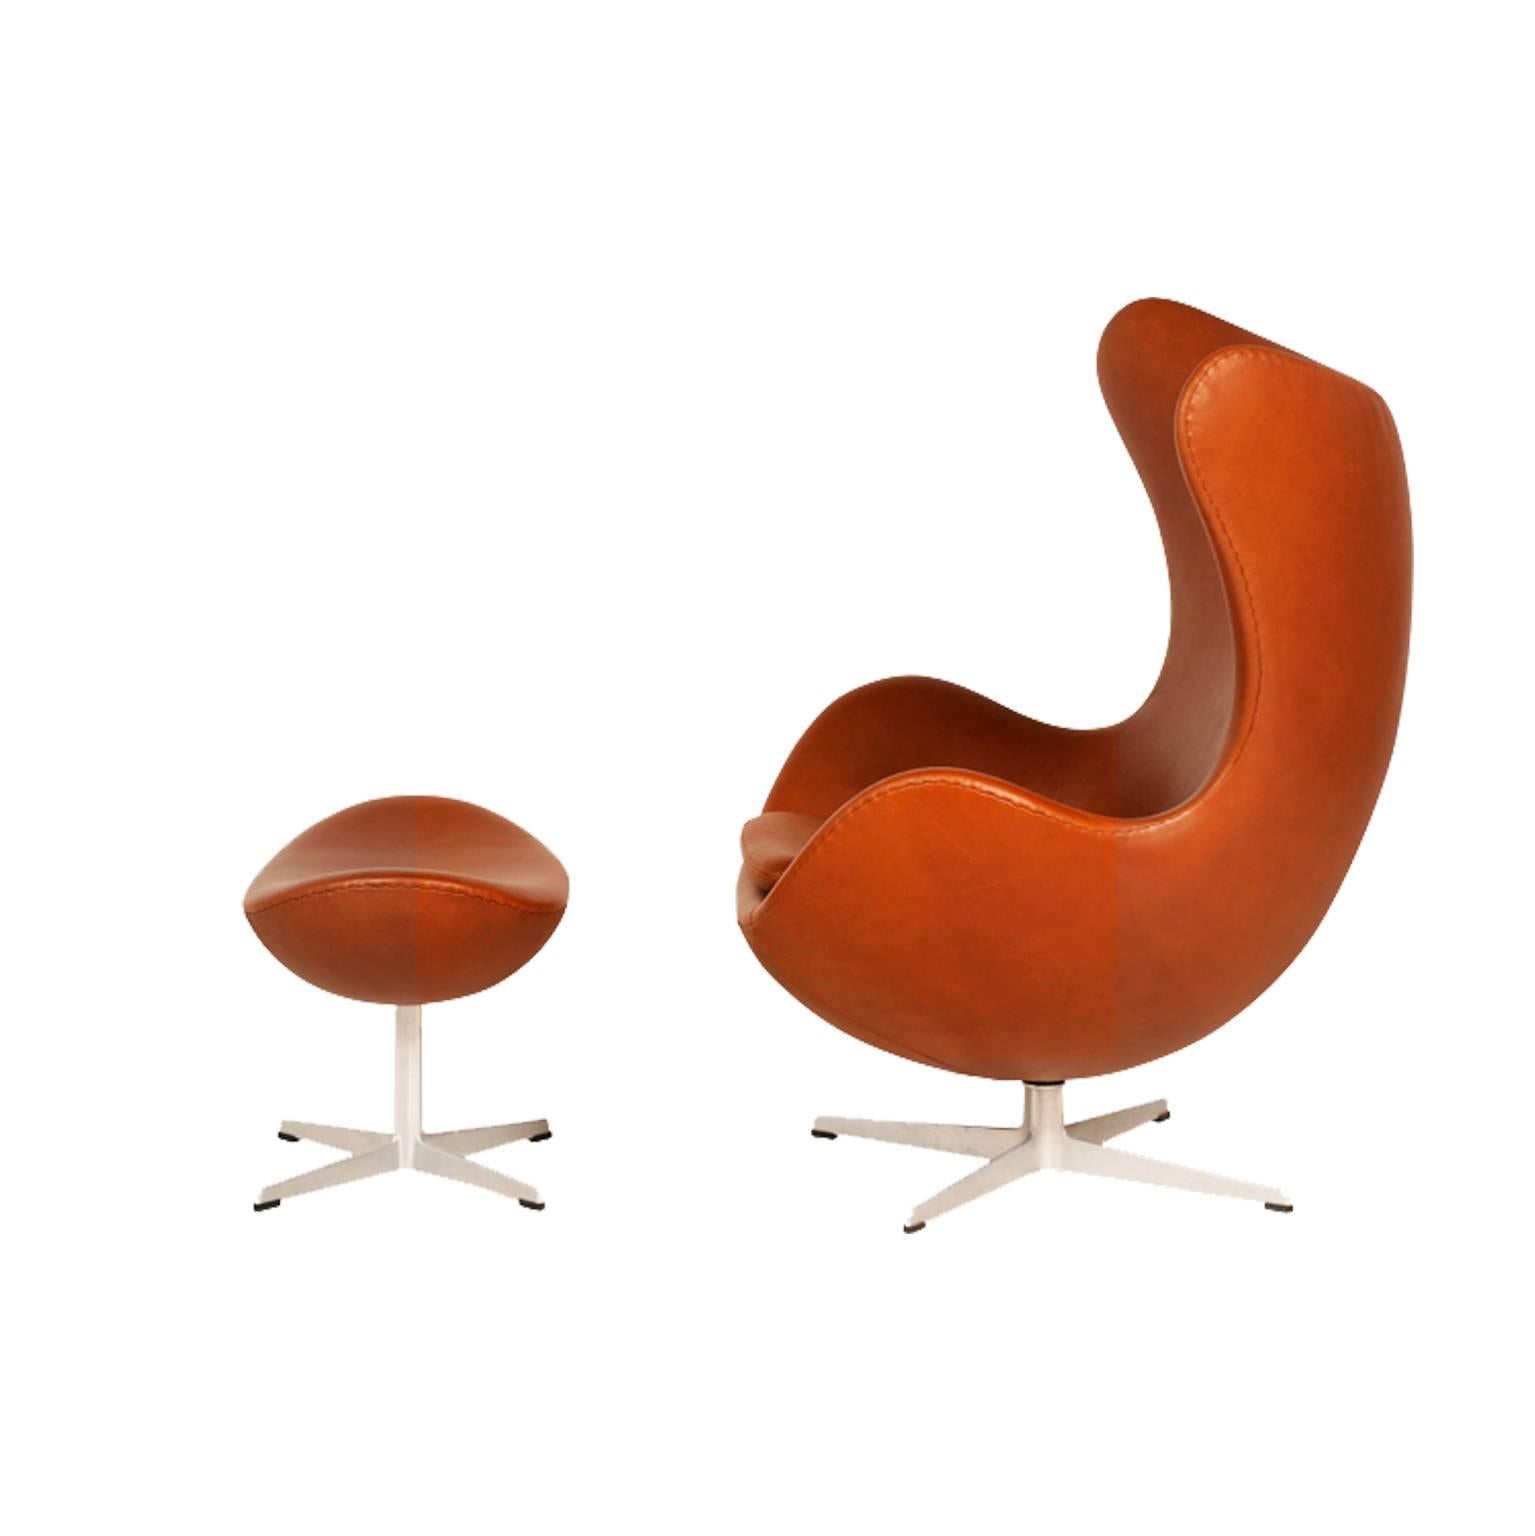 Designer: Arne Jacobsen.
Manufacturer: Fritz Hansen.
Period/Style: Danish Modern.
Country: Denmark.
Date: 1958.

Dimensions: 42″ H x 35″ L x 31″ W.
Materials: Leather, aluminum.
Condition: Excellent newly reupholstered.
Number of items: